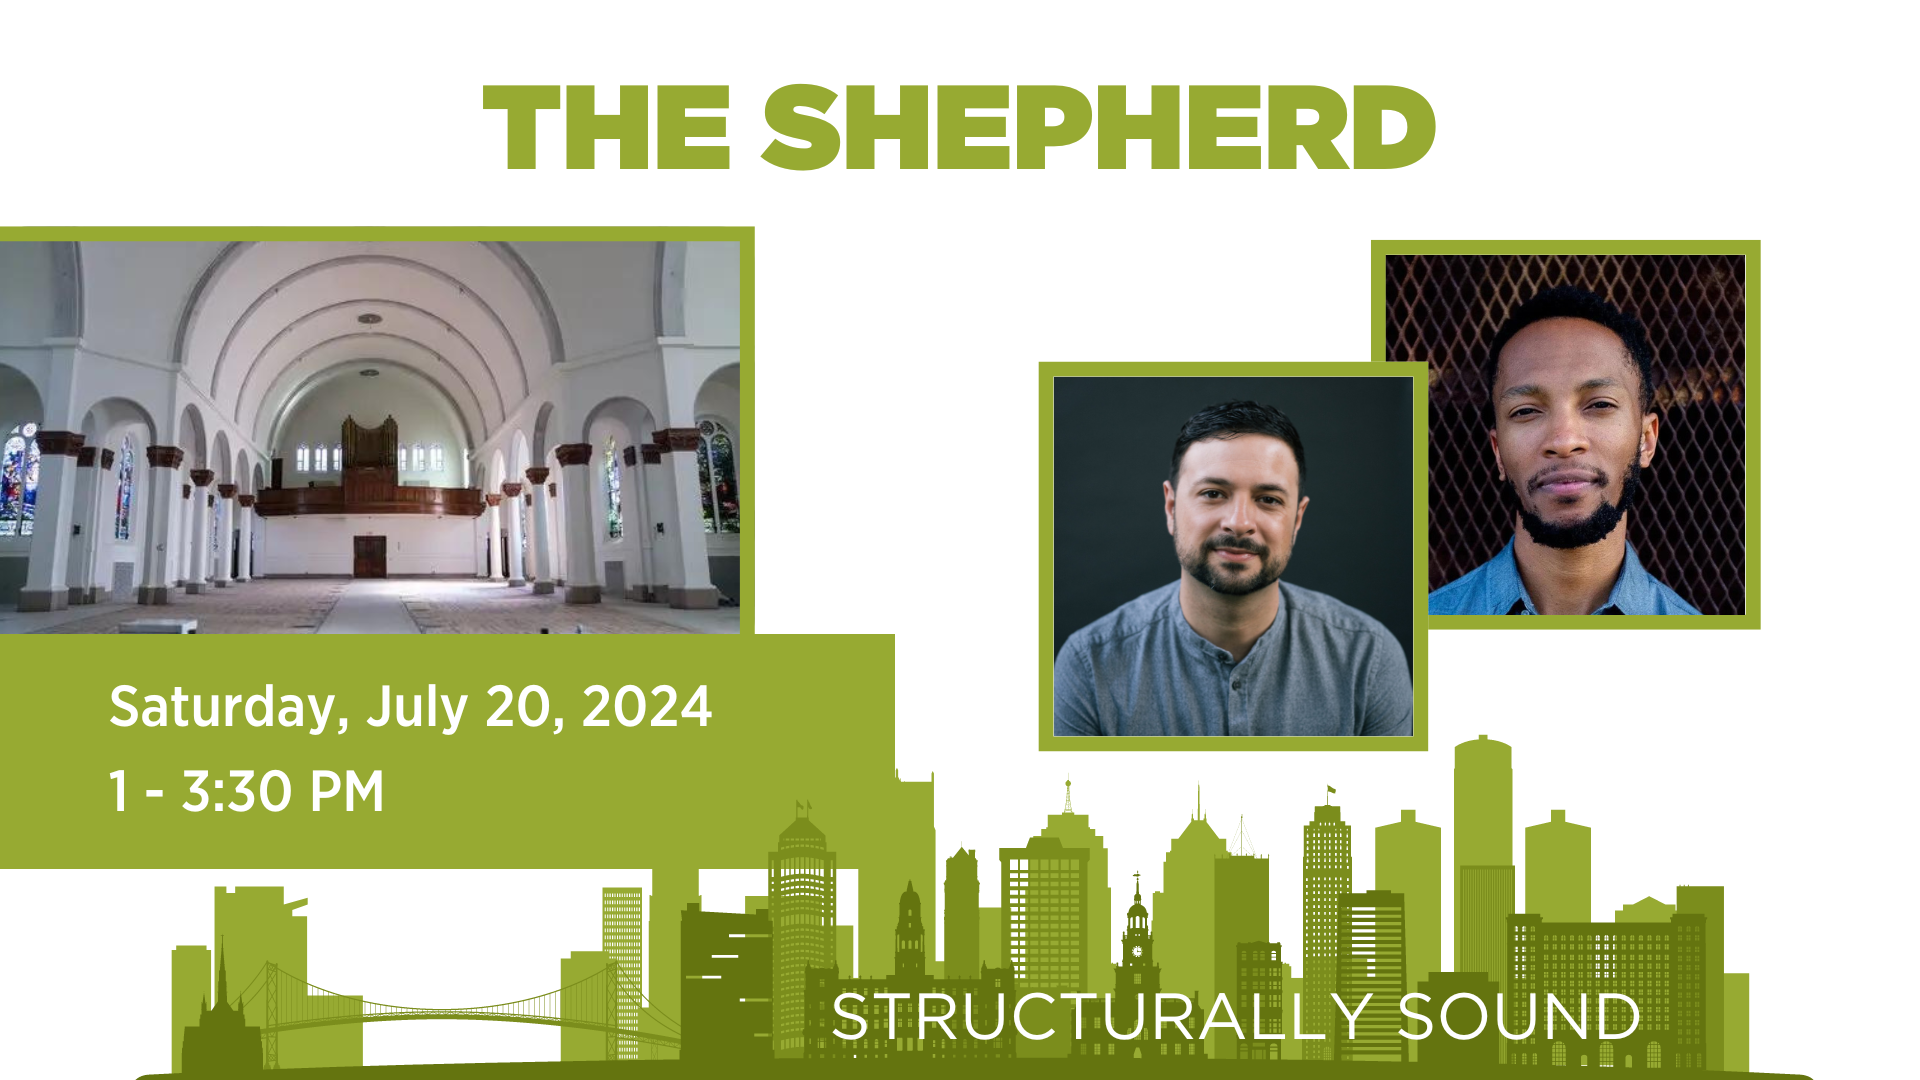 Structurally Sound The Shepherd